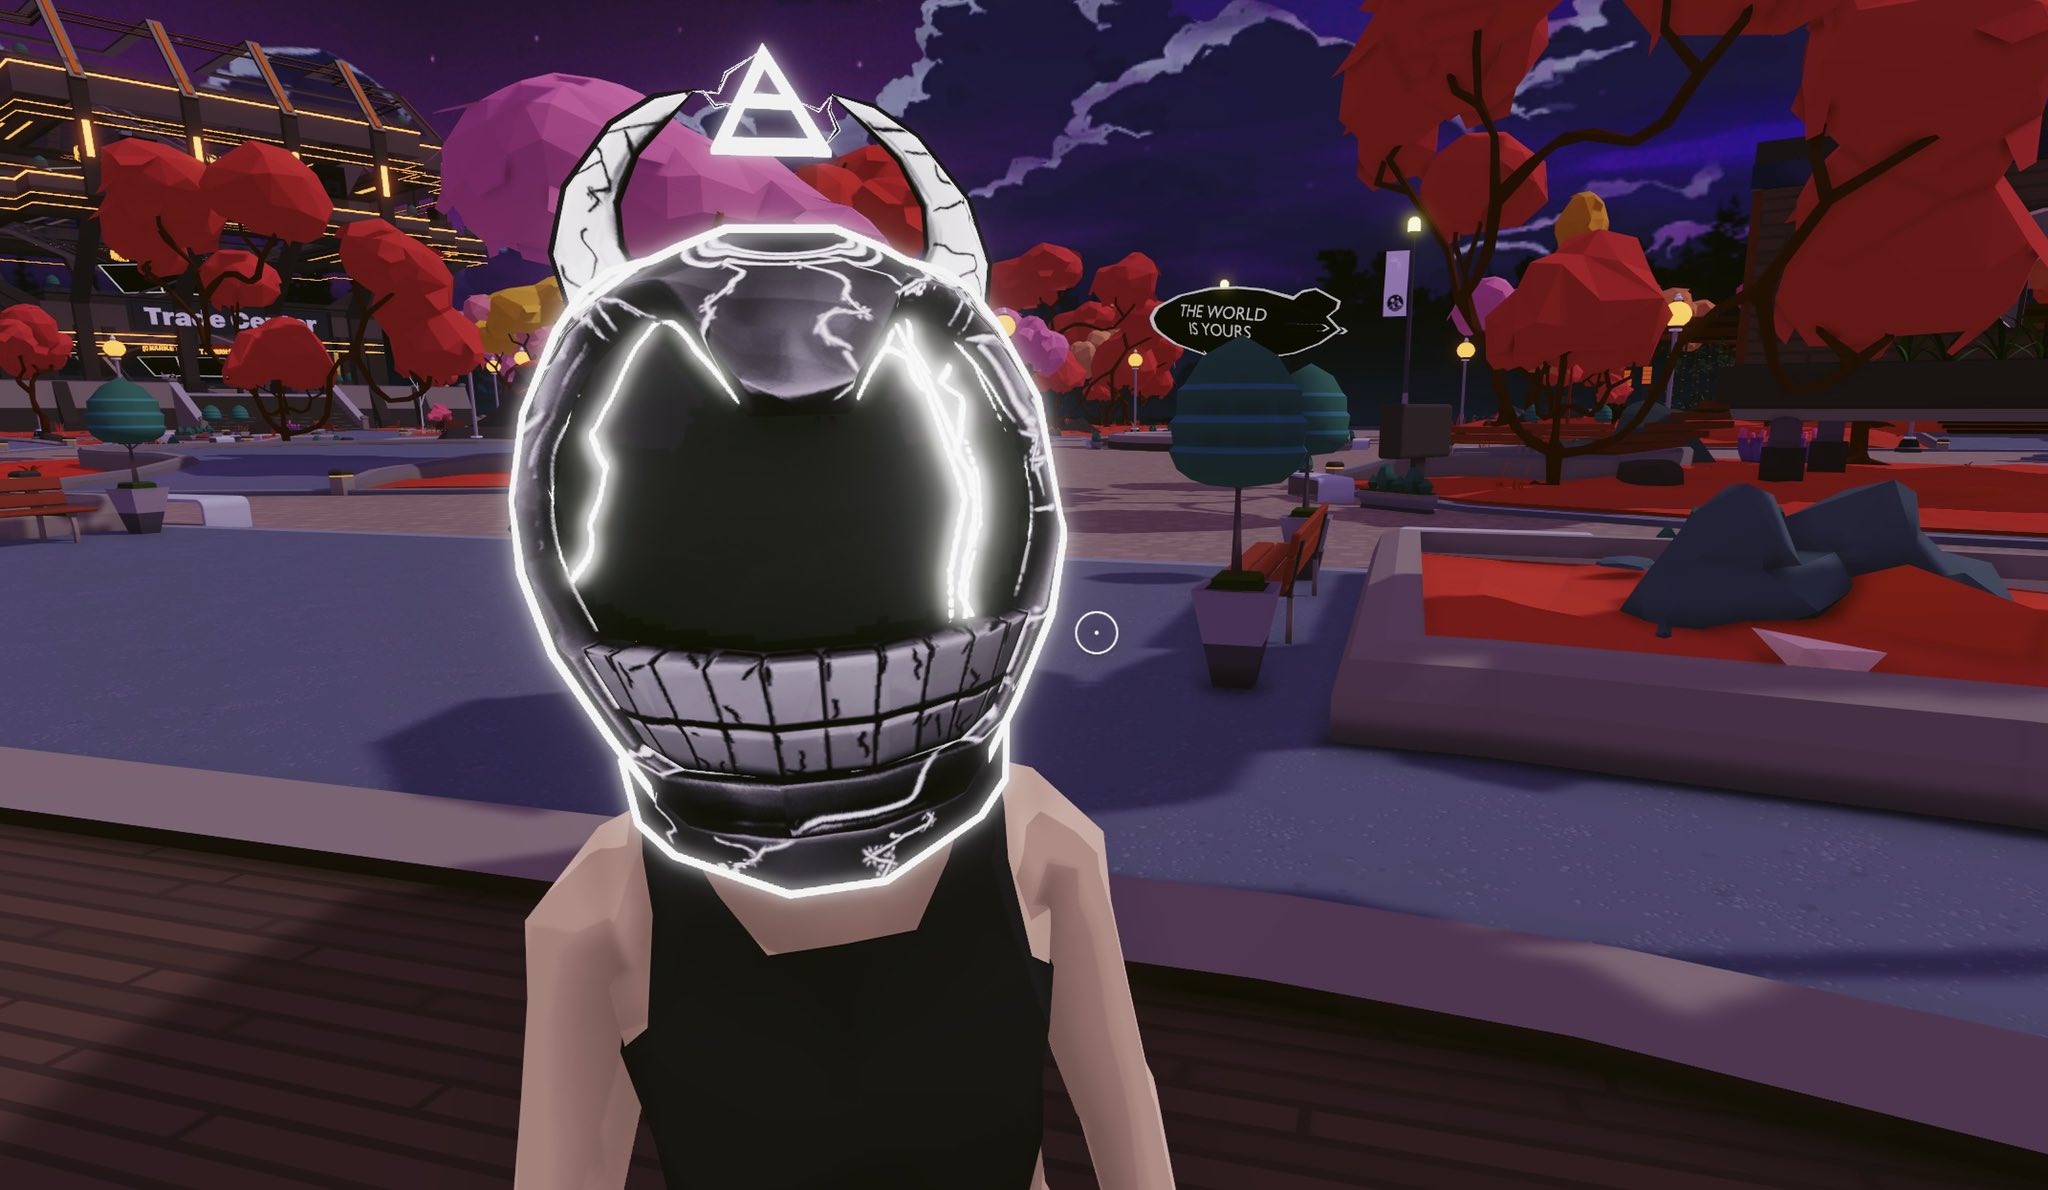 RT dapp_craft: DAPPCRAFT 2.0 – We want to shape a better world from the heart of the action.  If you're with us, come to the event and get this helmet as a gift! [events.decentraland.org] [twitter.com] [pbs.twimg.com]